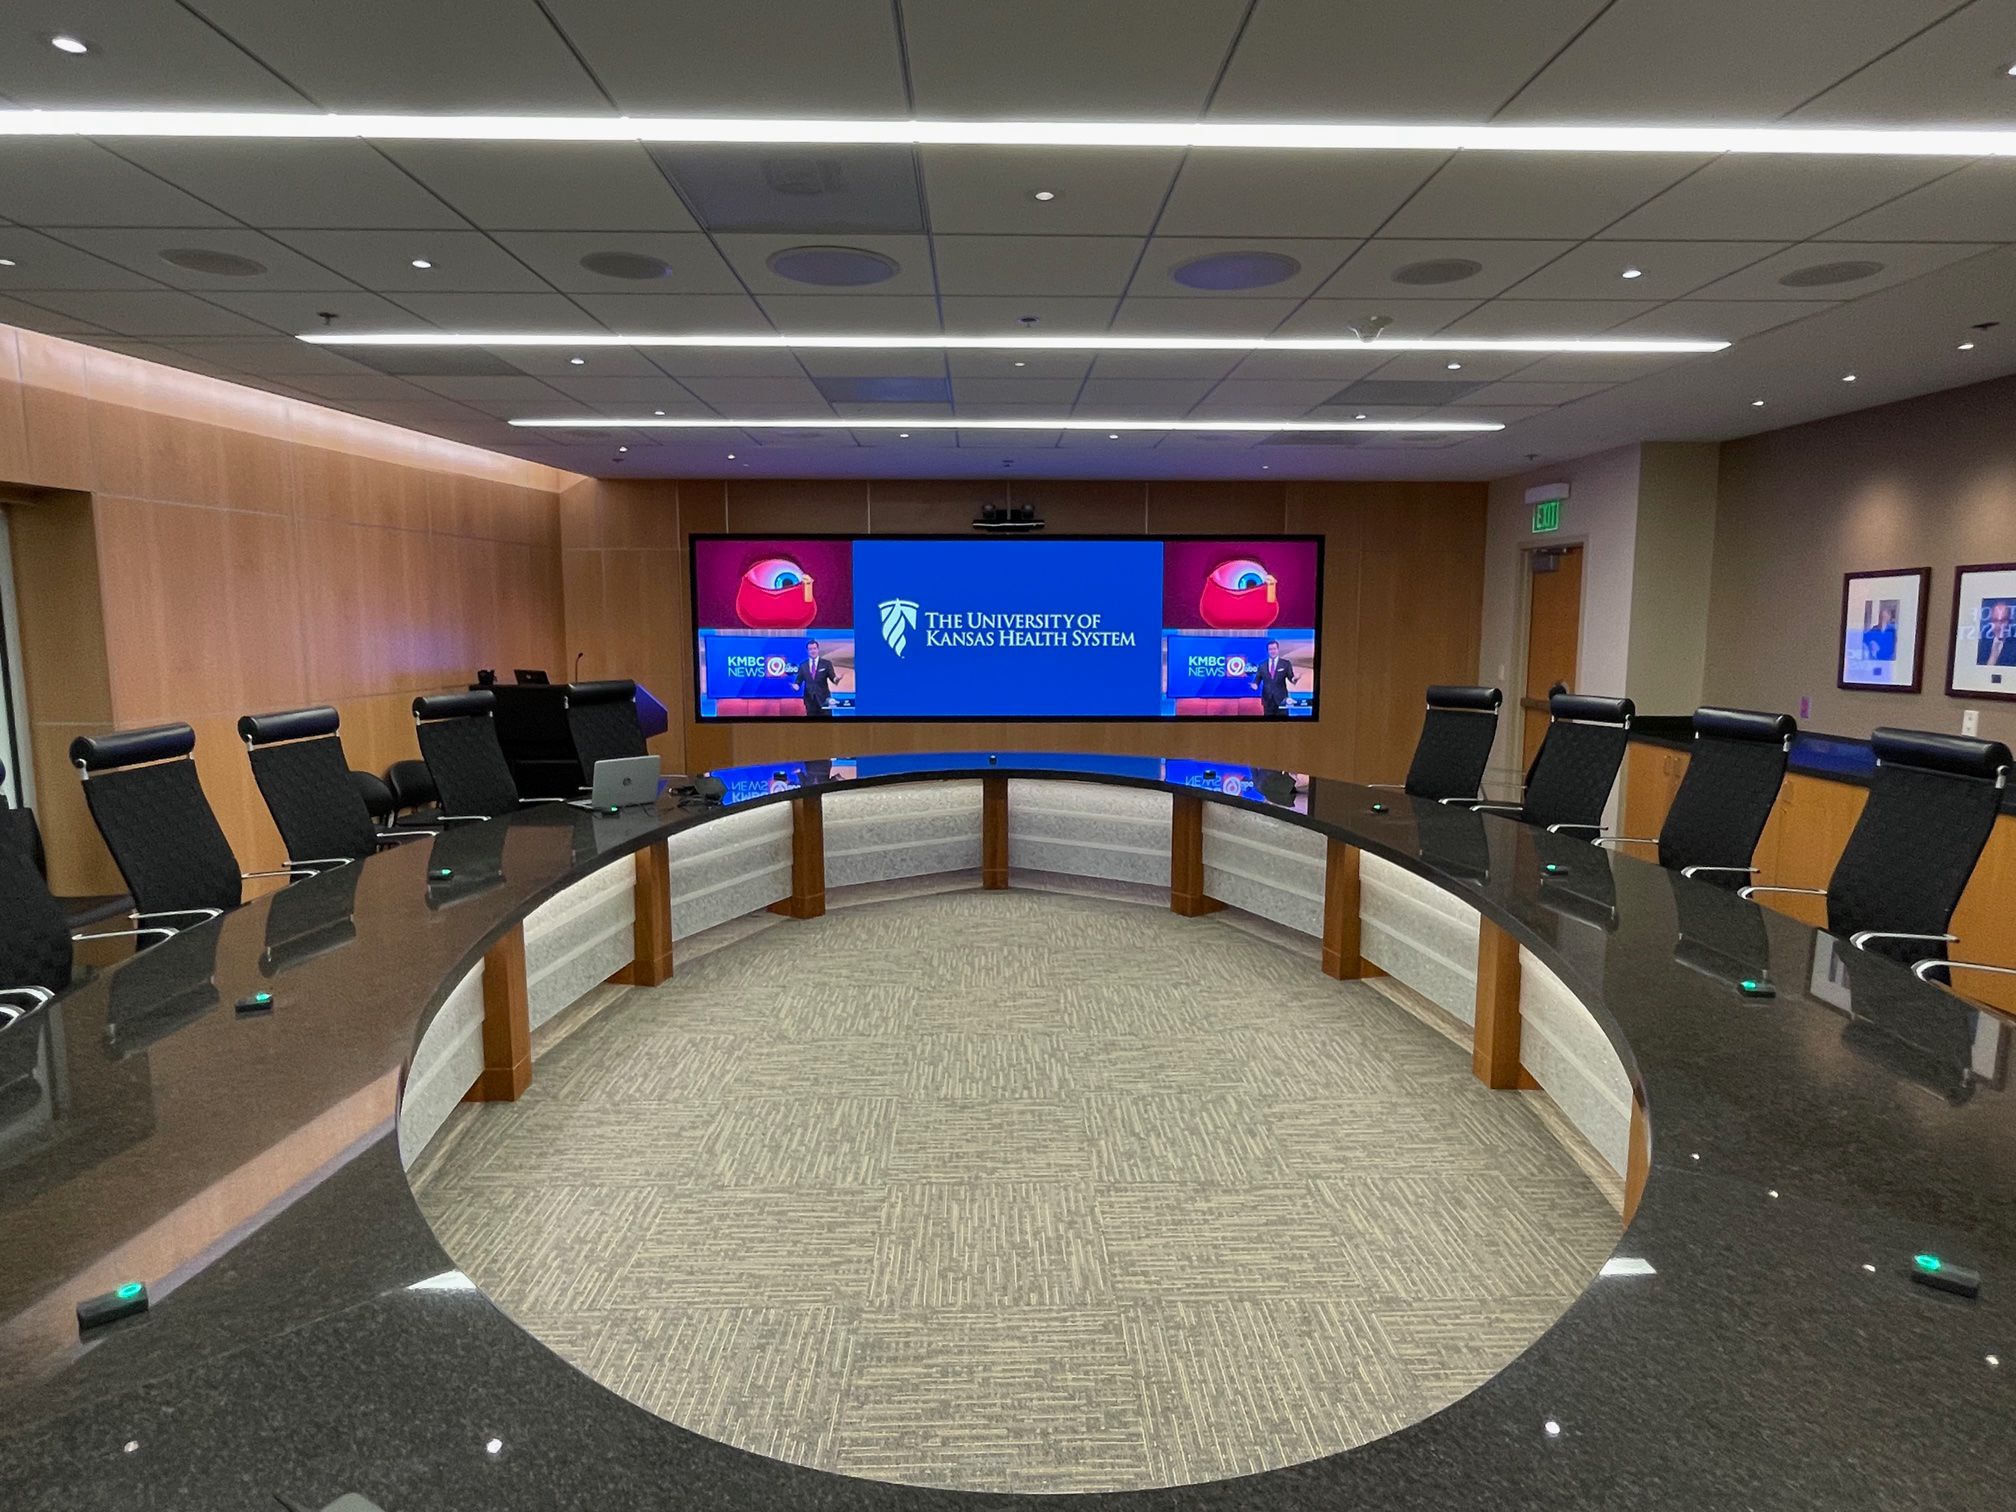 The University of Kansas Health System modernizes the boardroom with